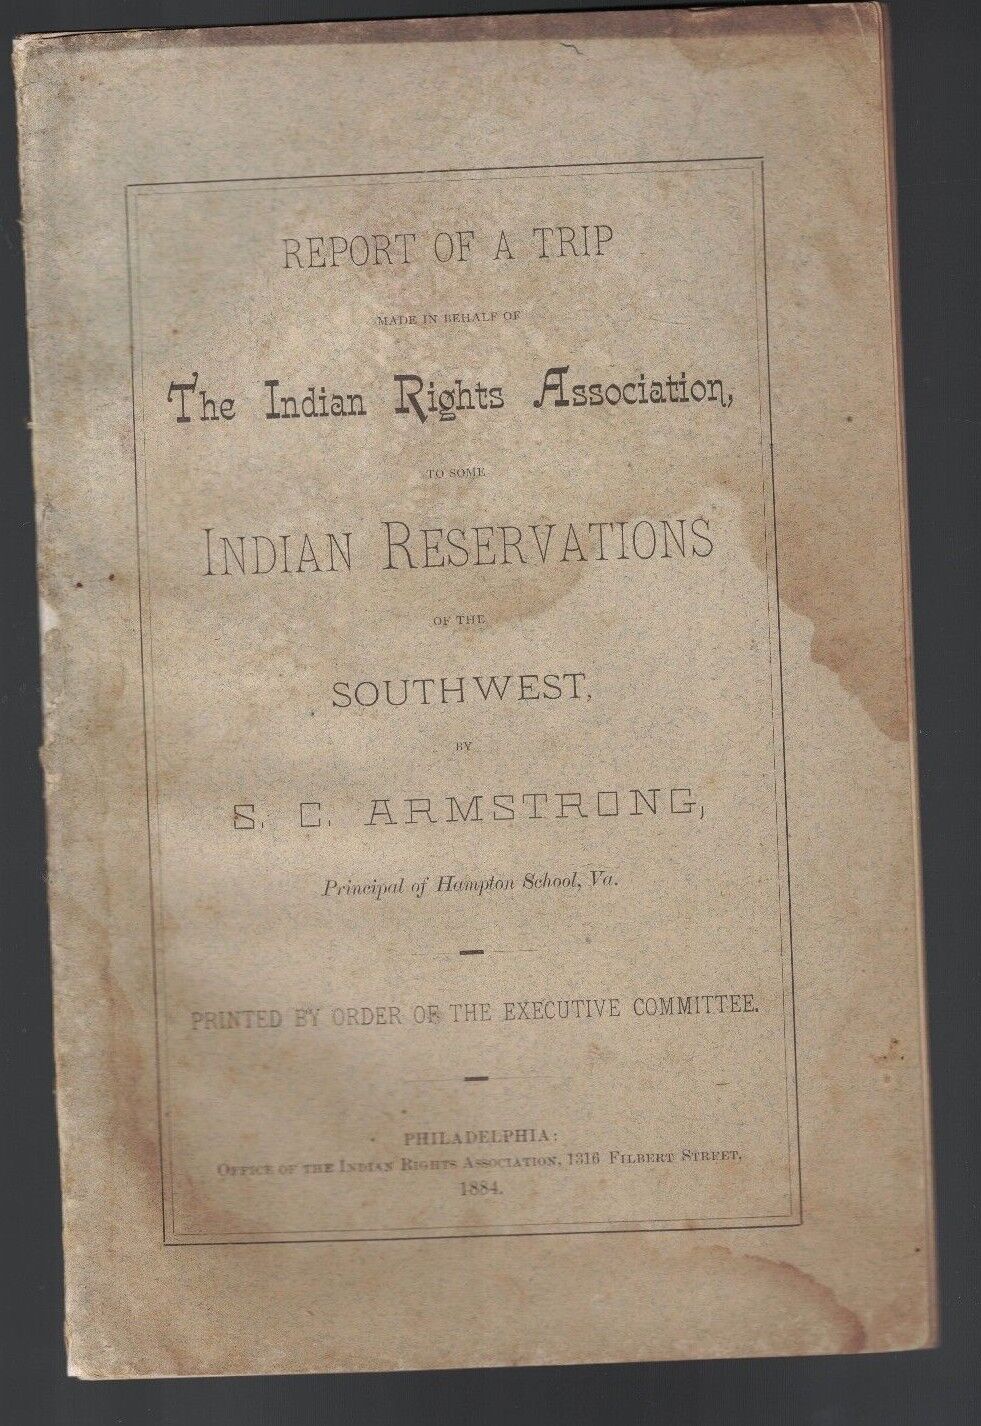 Report of a Trip Made in Behalf of Indian Rights Association 1884 Booklet  